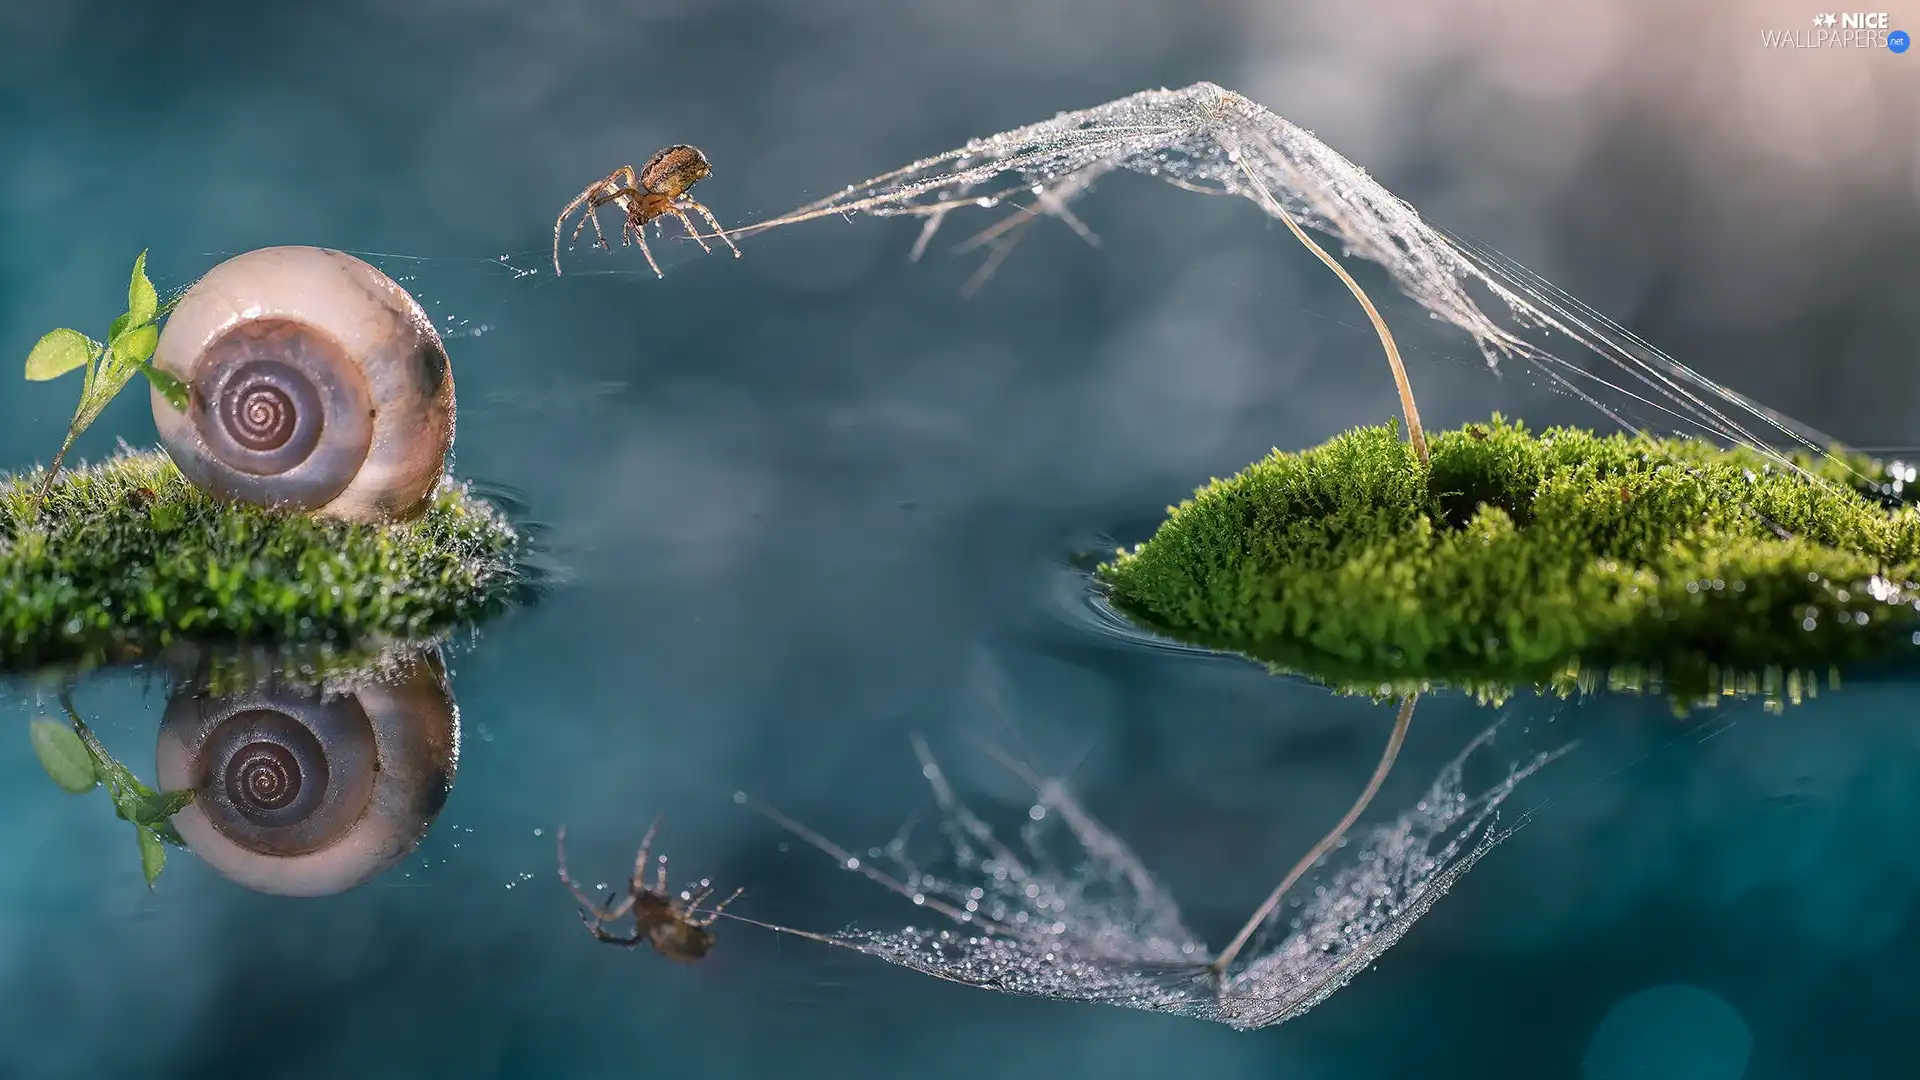 Web, Close, Moss, water, shell, Spider